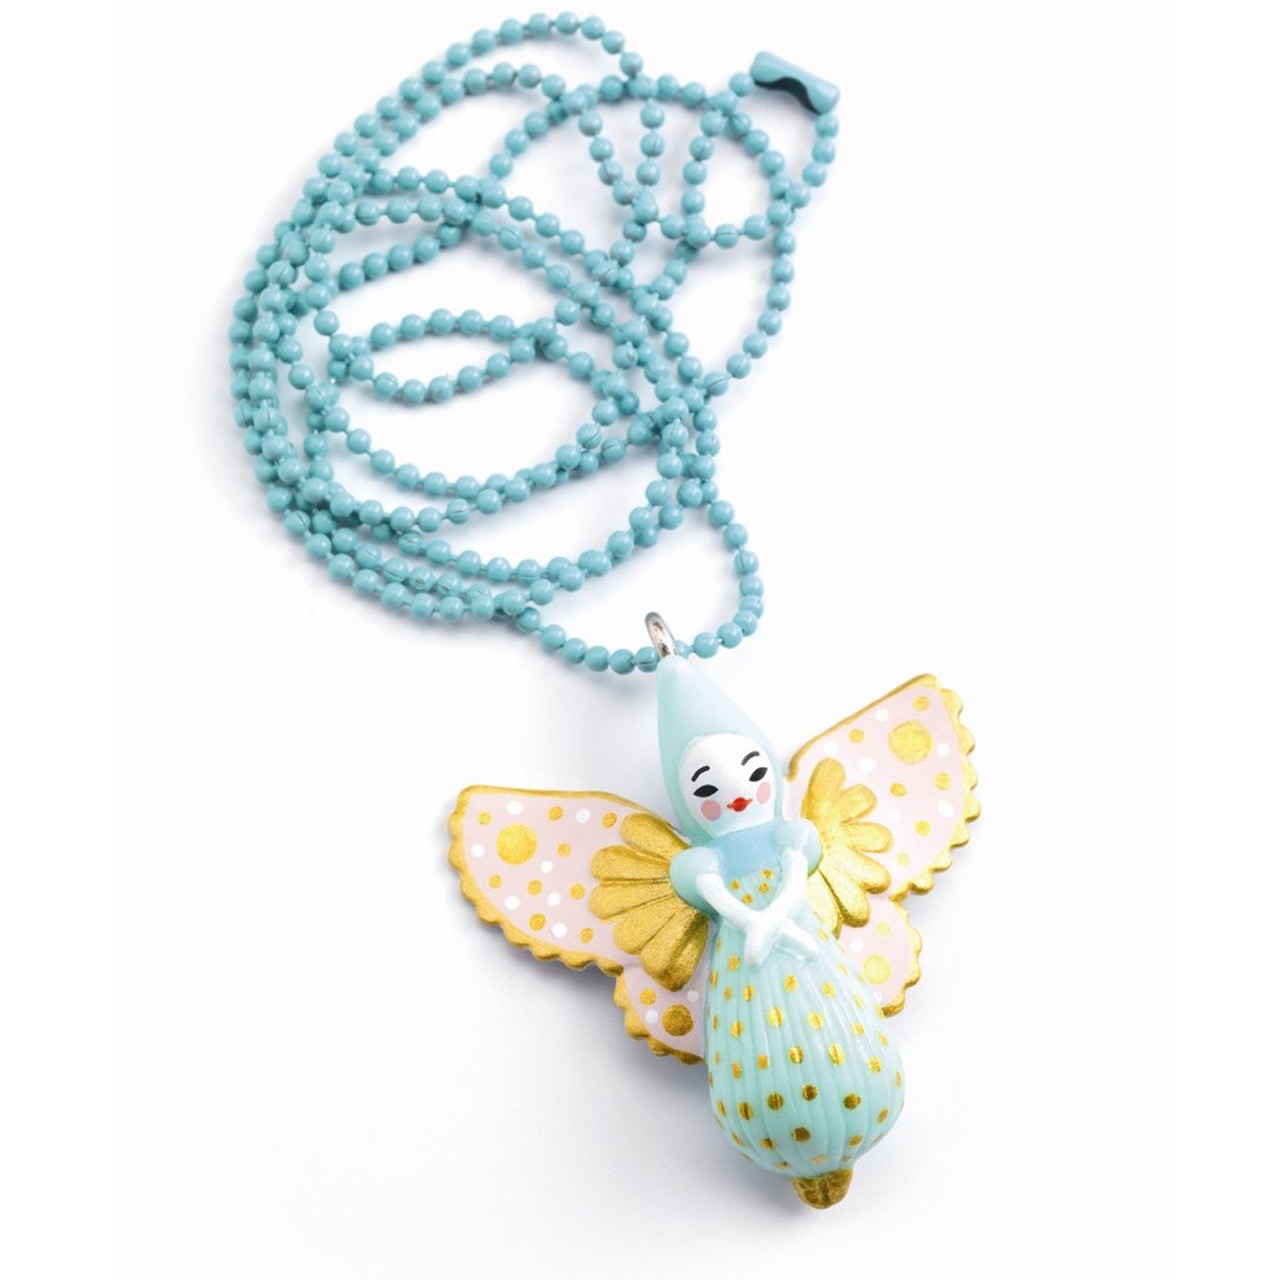 djeco lovely charms ketting - fee